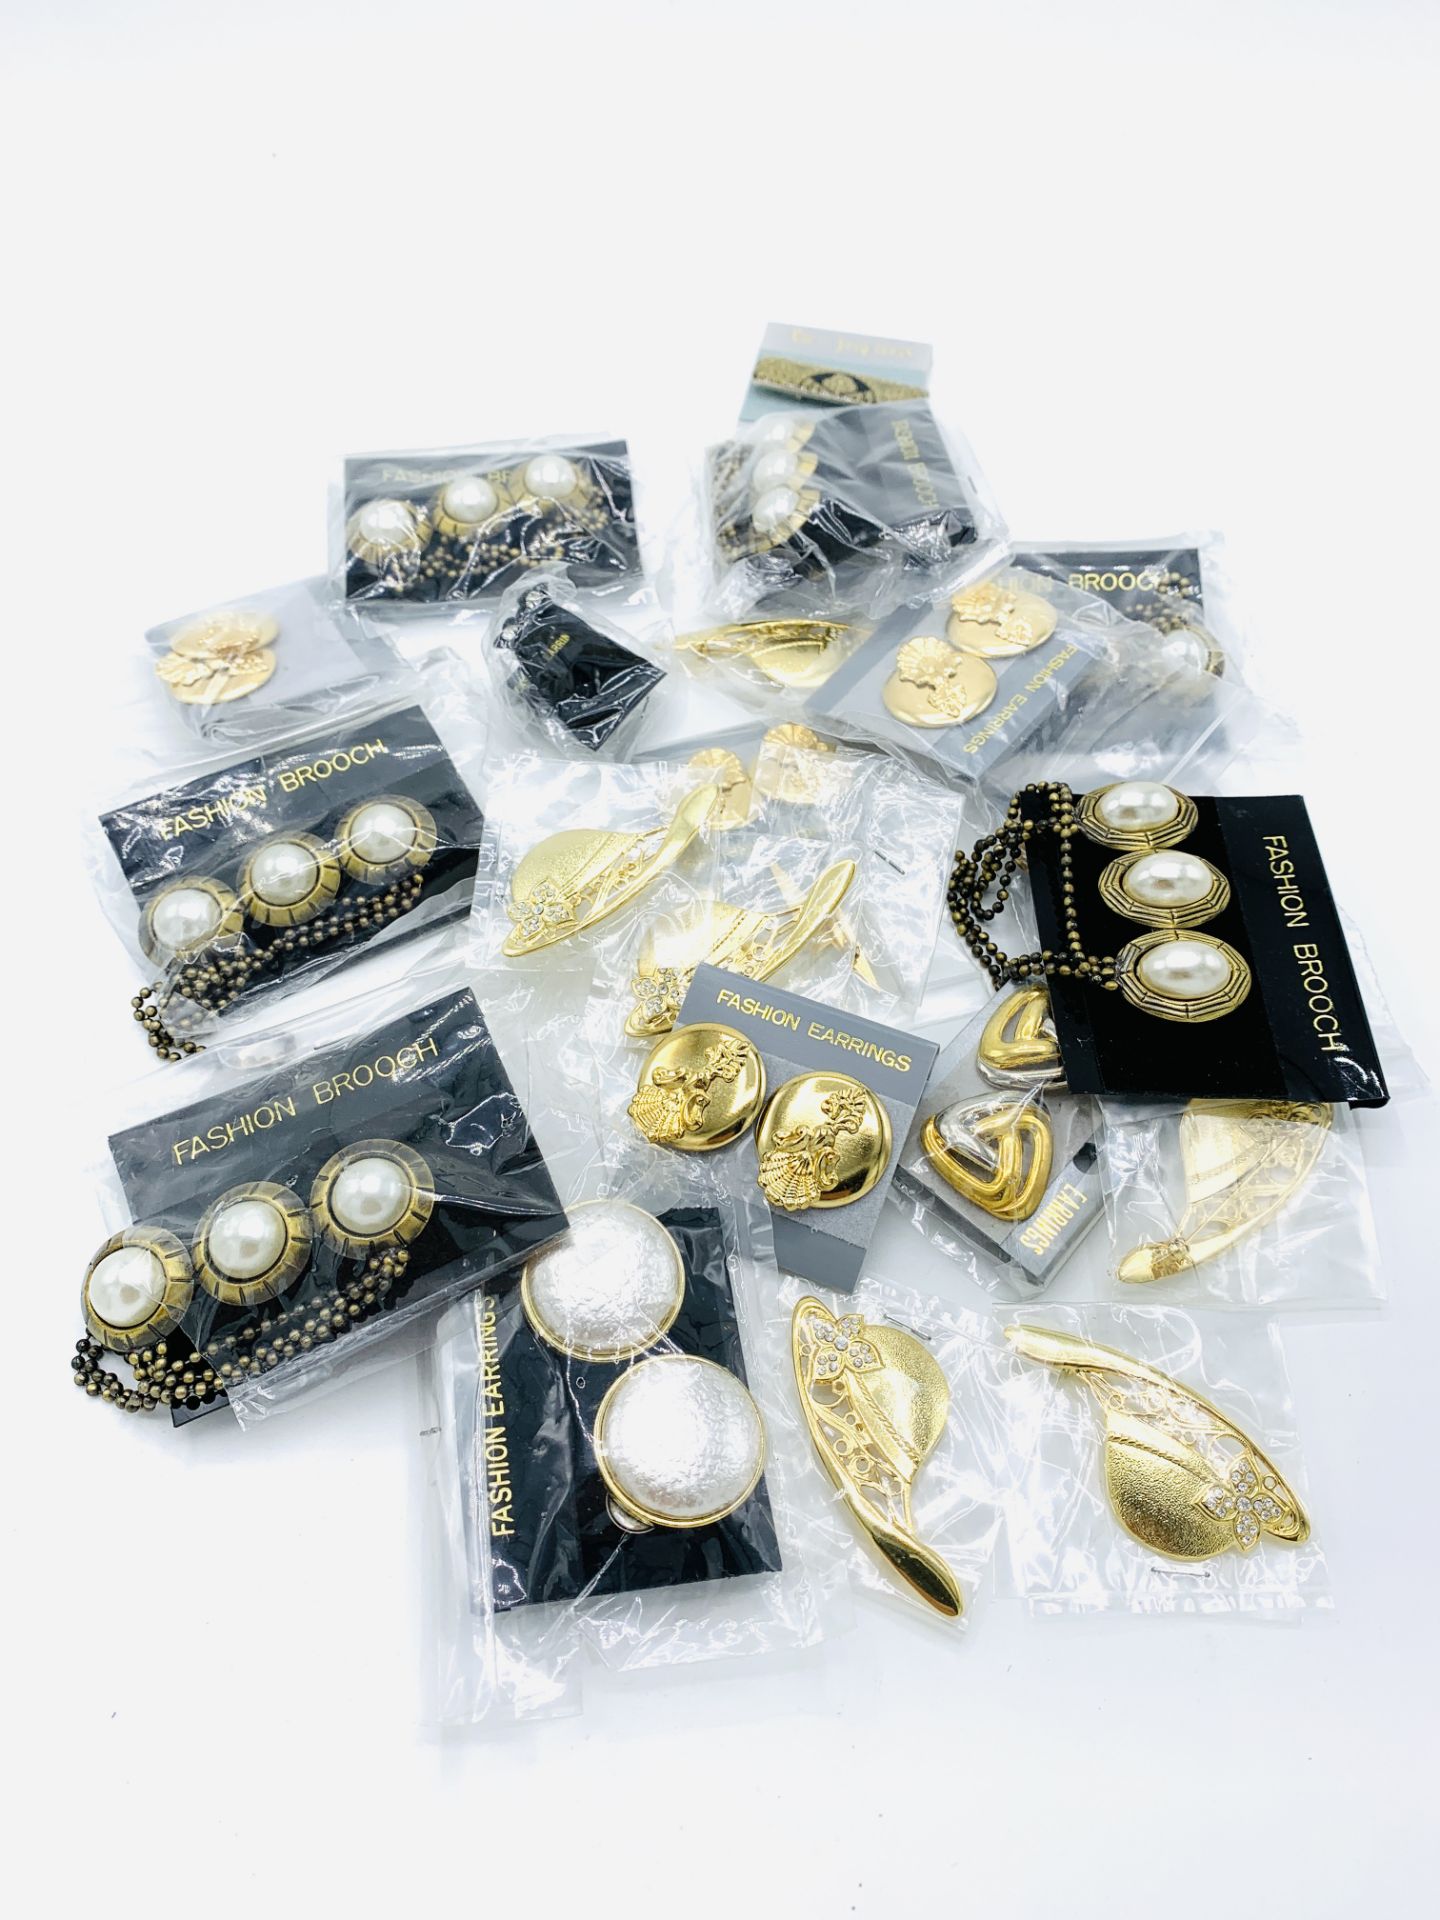 Eight pairs of fashion earrings and fifteen costume brooches, all new